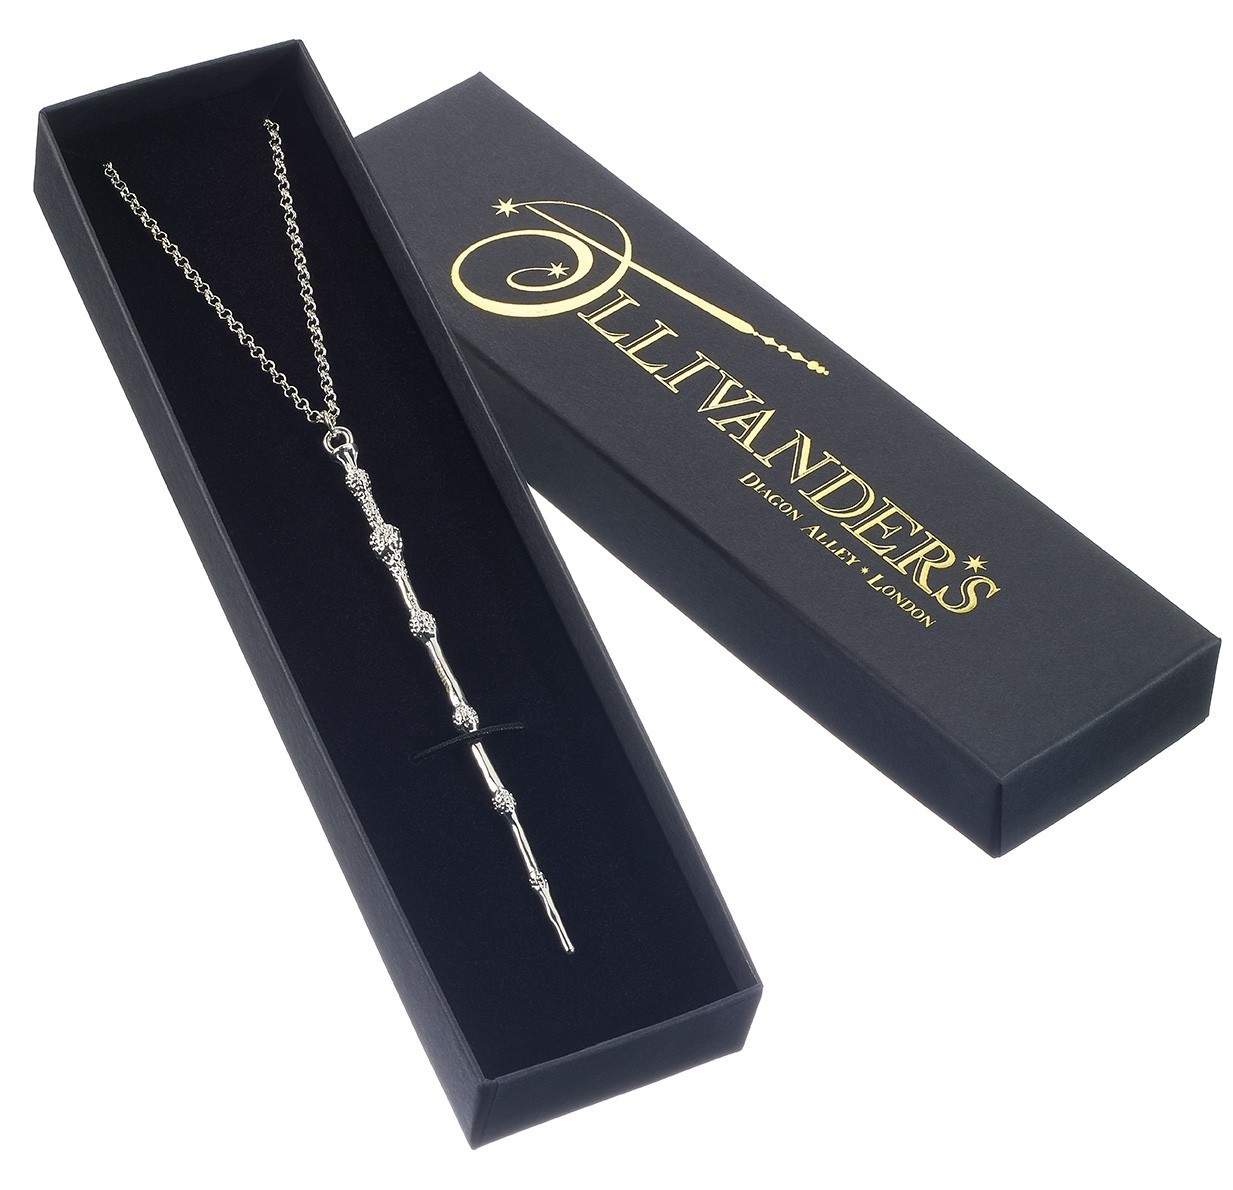 Professor Dumbledore Sterling Silver Wand Necklace